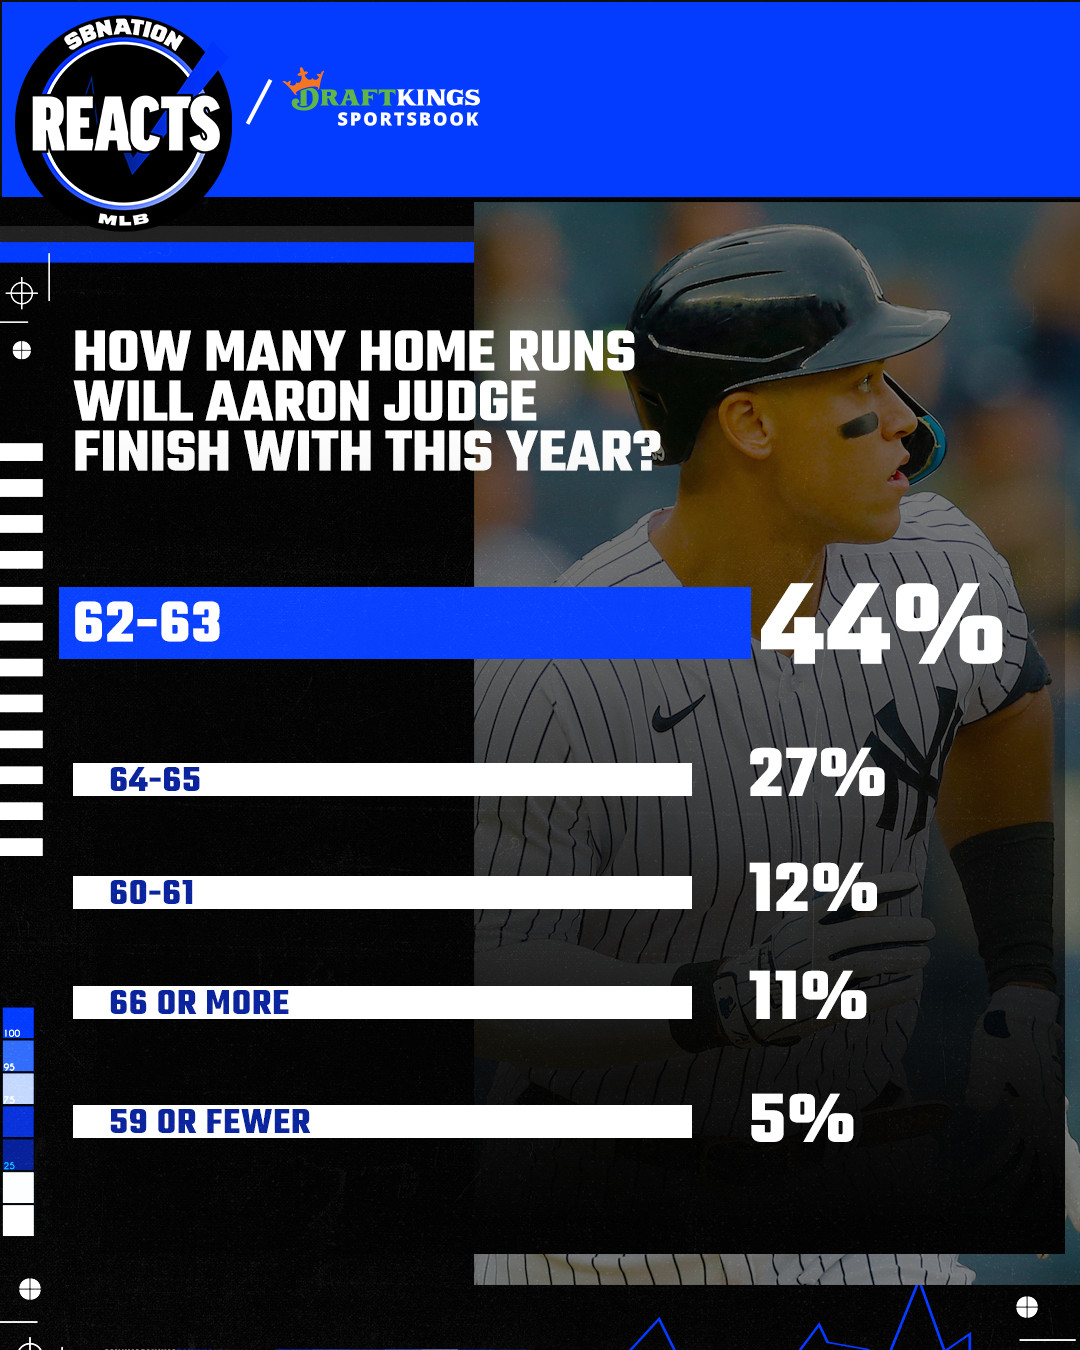 For Yankee 2 yankees s fans, it's not if Aaron Judge breaks HR record, but  when